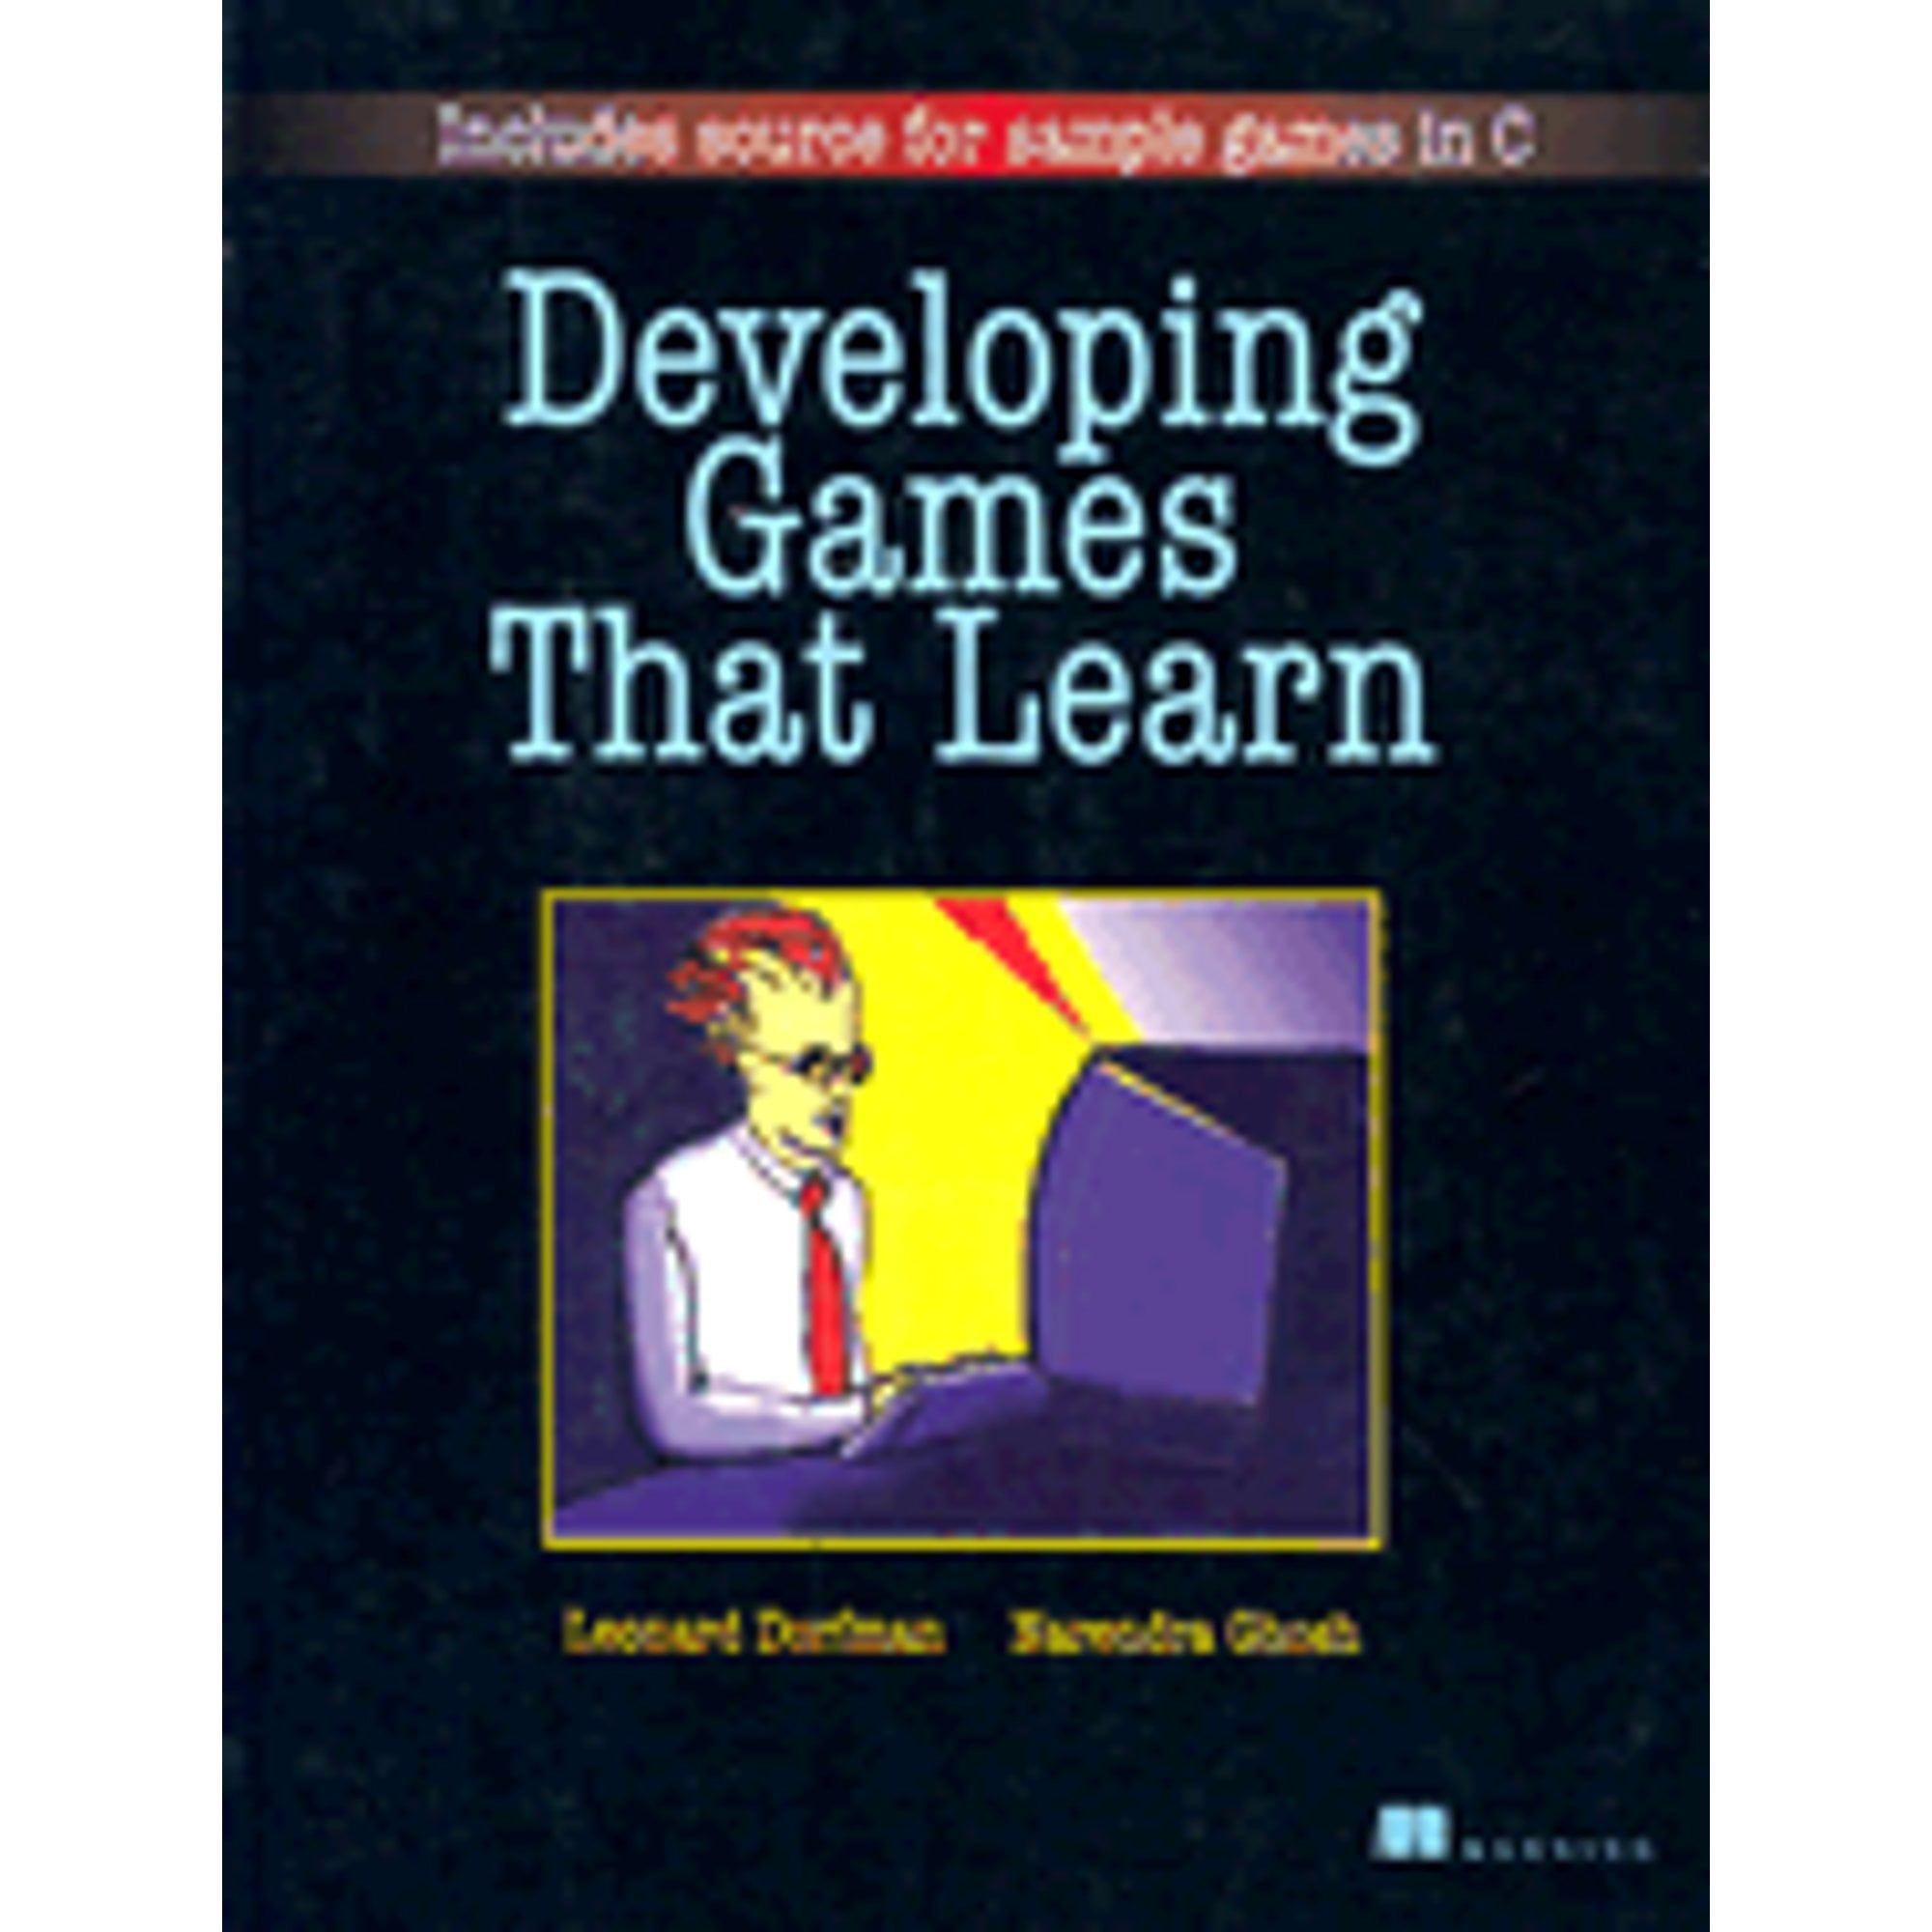 Pre-Owned Developing Games That Learn (Bk/Disk) (Paperback 9780135696170) by Len Dorfman, Narendra K. Ghosh, Manning Publications